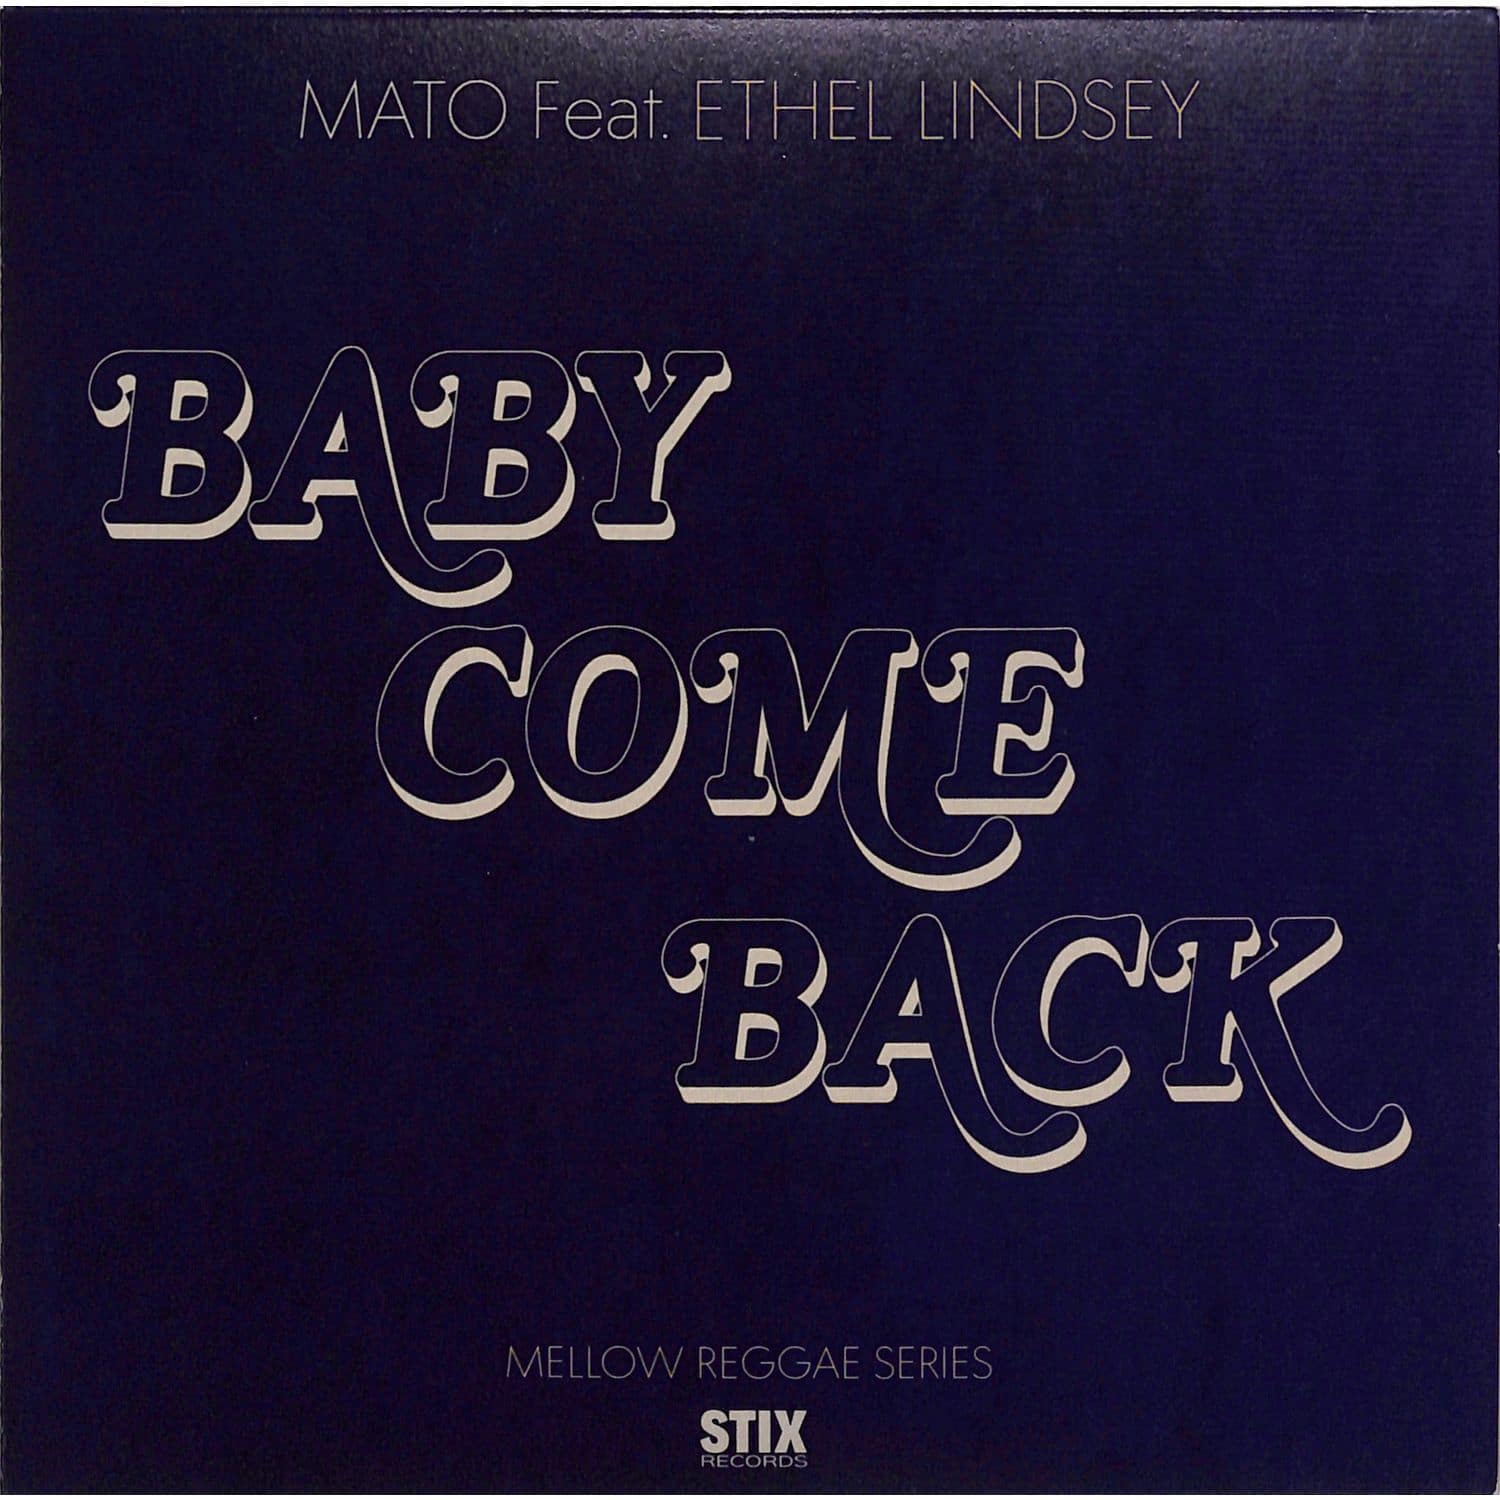 Mato Feat. Ethel Lindsey - BABY COME BACK 